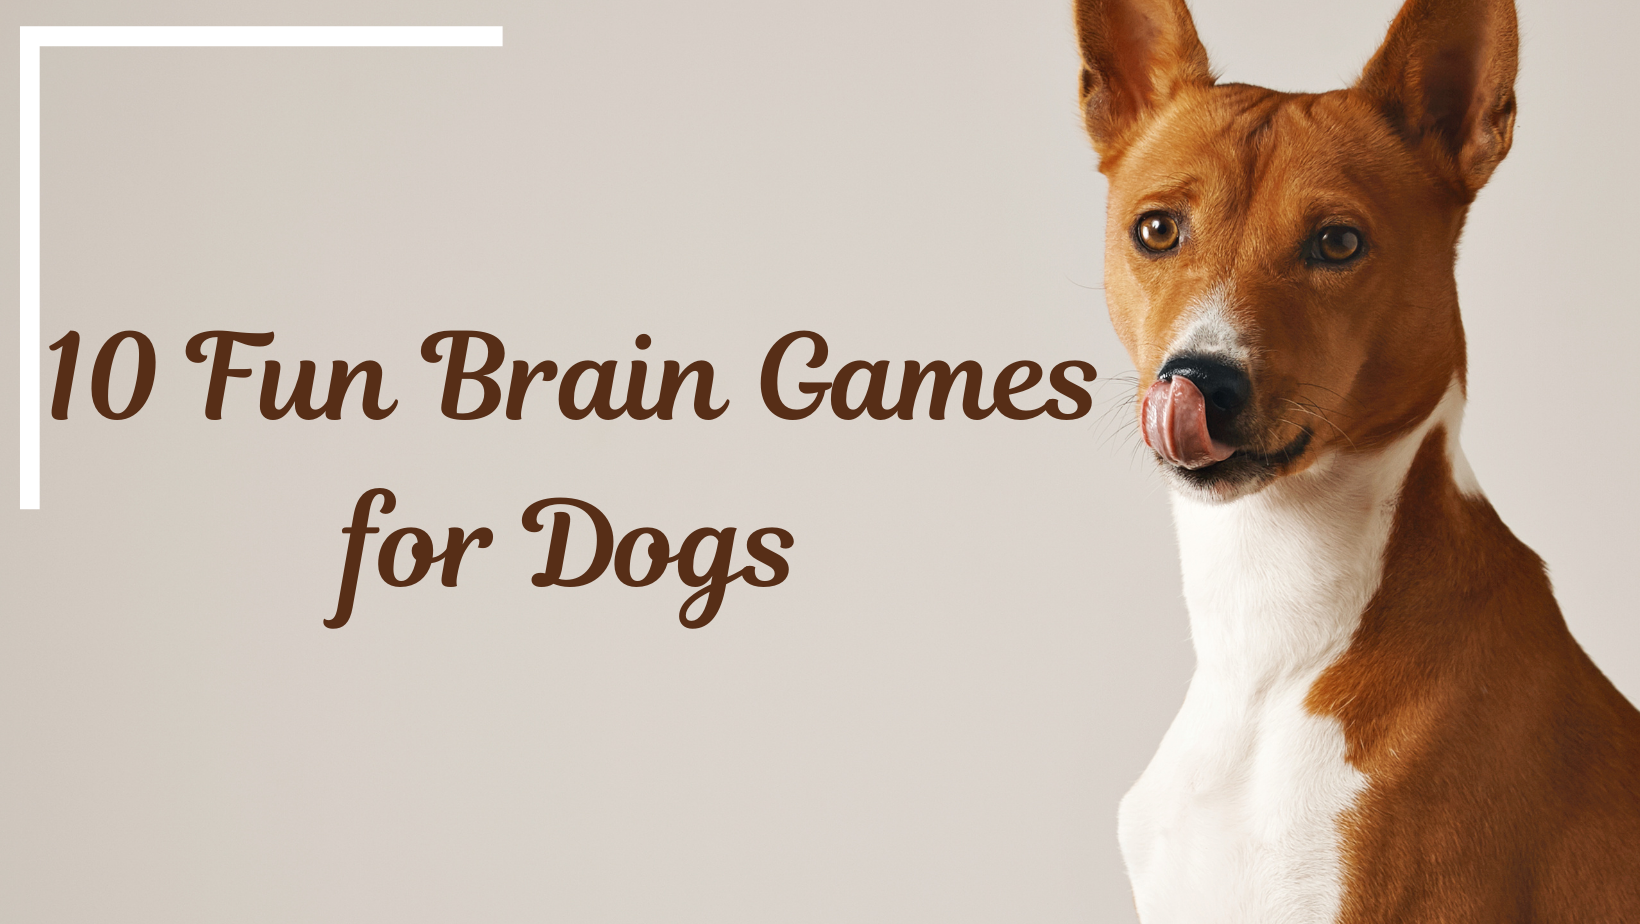 10 Fun Brain Games for Dogs - Canine Care